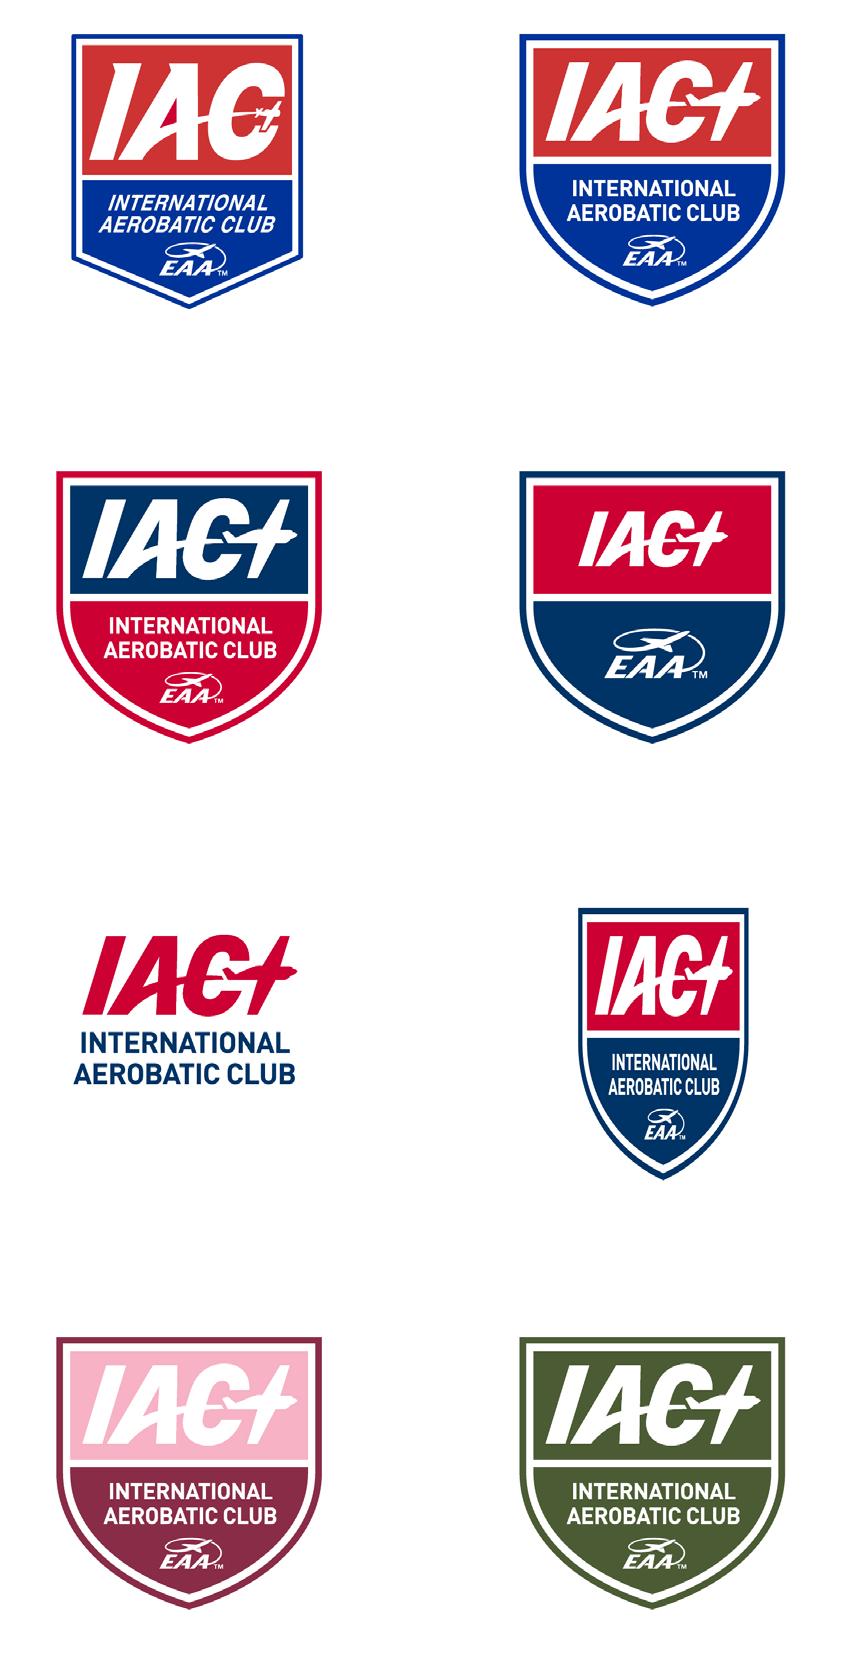 LOGO USAGE RULES UNACCEPTABLE USAGE When using the IAC Shield logo on communications, always use approved artwork and do not alter, distort or replace any of the logo elements.